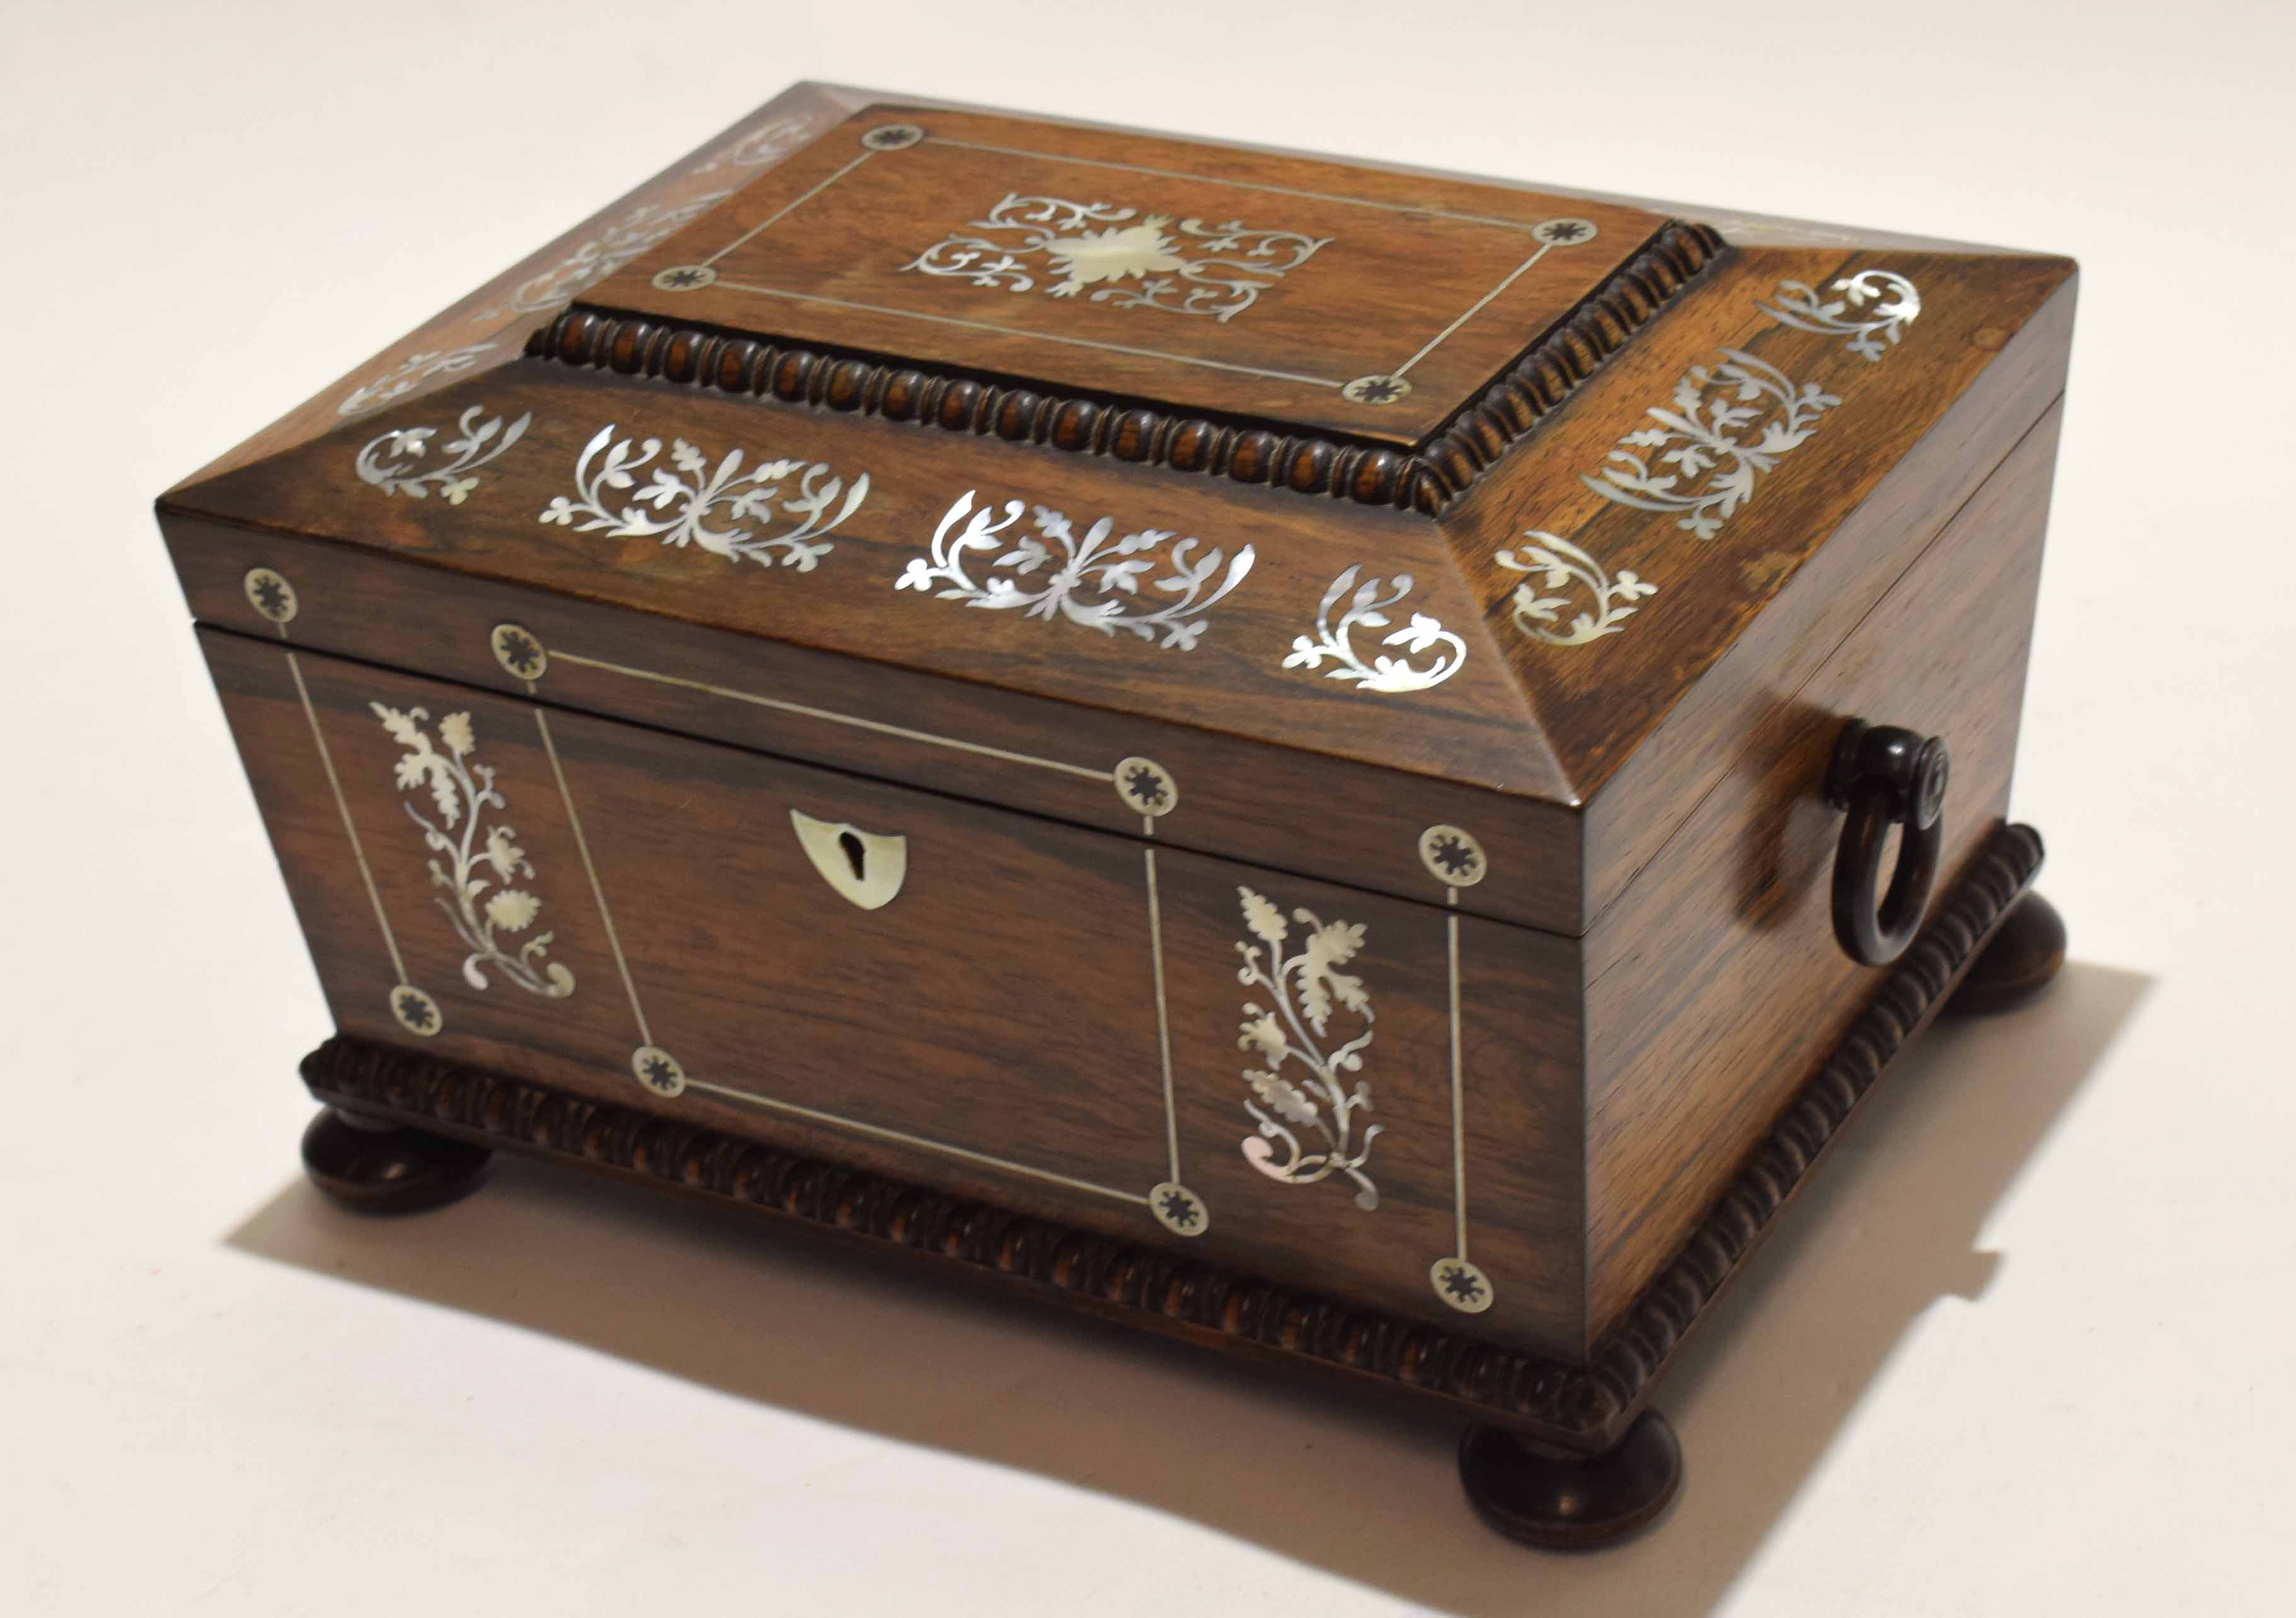 19th century rosewood and mother of pearl inlaid sewing box with fitted plush lined interior with